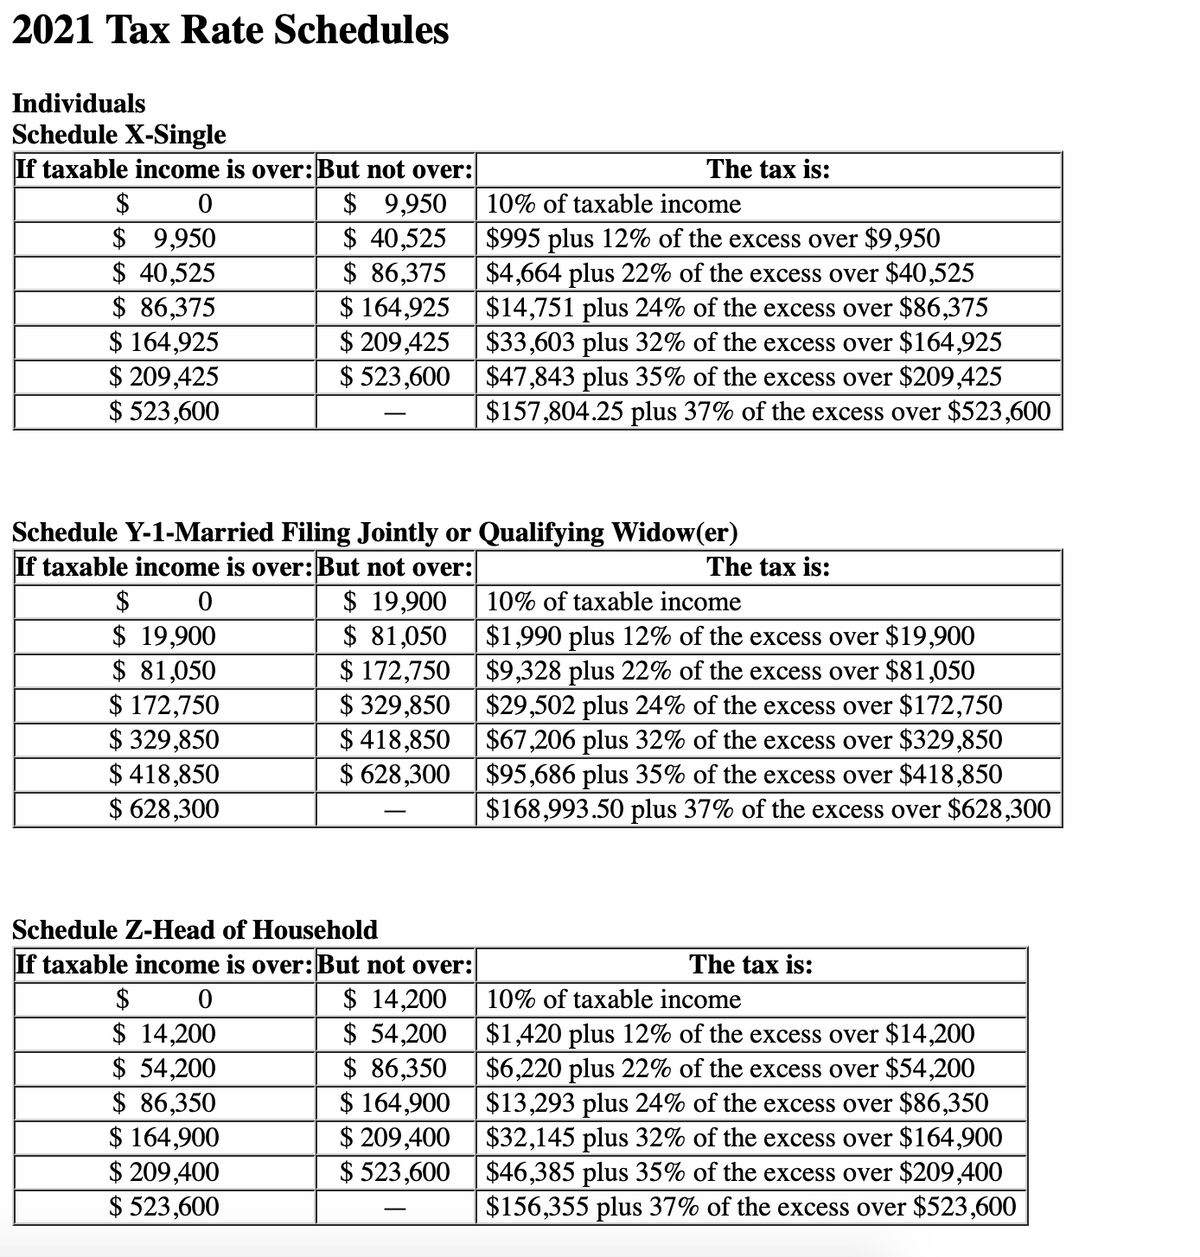 2021 Tax Rate Schedules
Individuals
Schedule X-Single
If taxable income is over:But not over:
The tax is:
$ 9,950
$ 40,525
$ 86,375
$ 164,925 $14,751 plus 24% of the excess over $86,375
$ 209,425 $33,603 plus 32% of the excess over $164,925
$ 523,600
$
10% of taxable income
$ 9,950
$ 40,525
$ 86,375
$ 164,925
$ 209,425
$ 523,600
$995 plus 12% of the excess over $9,950
$4,664 plus 22% of the excess over $40,525
$47,843 plus 35% of the excess over $209,425
$157,804.25 plus 37% of the excess over $523,600
Schedule Y-1-Married Filing Jointly or Qualifying Widow(er)
If taxable income is over:But not over:
The tax is:
$ 19,900
$ 81,050
$ 172,750 $9,328 plus 22% of the excess over $81,050
$ 329,850 $29,502 plus 24% of the excess over $172,750
$ 418,850 $67,206 plus 32% of the excess over $329,850
$ 628,300 |$95,686 plus 35% of the excess over $418,850
$
10% of taxable income
$ 19,900
$ 81,050
$ 172,750
$ 329,850
$ 418,850
$ 628,300
$1,990 plus 12% of the excess over $19,900
$168,993.50 plus 37% of the excess over $628,300
Schedule Z-Head of Household
If taxable income is over:But not over:
The tax is:
$ 14,200
$ 54,200
$ 86,350
$ 164,900 $13,293 plus 24% of the excess over $86,350
$ 209,400 $32,145 plus 32% of the excess over $164,900
$ 523,600 |$46,385 plus 35% of the excess over $209,400
$
10% of taxable income
$ 14,200
$ 54,200
$ 86,350
$ 164,900
$ 209,400
$ 523,600
$1,420 plus 12% of the excess over $14,200
$6,220 plus 22% of the excess over $54,200
$156,355 plus 37% of the excess over $523,600
